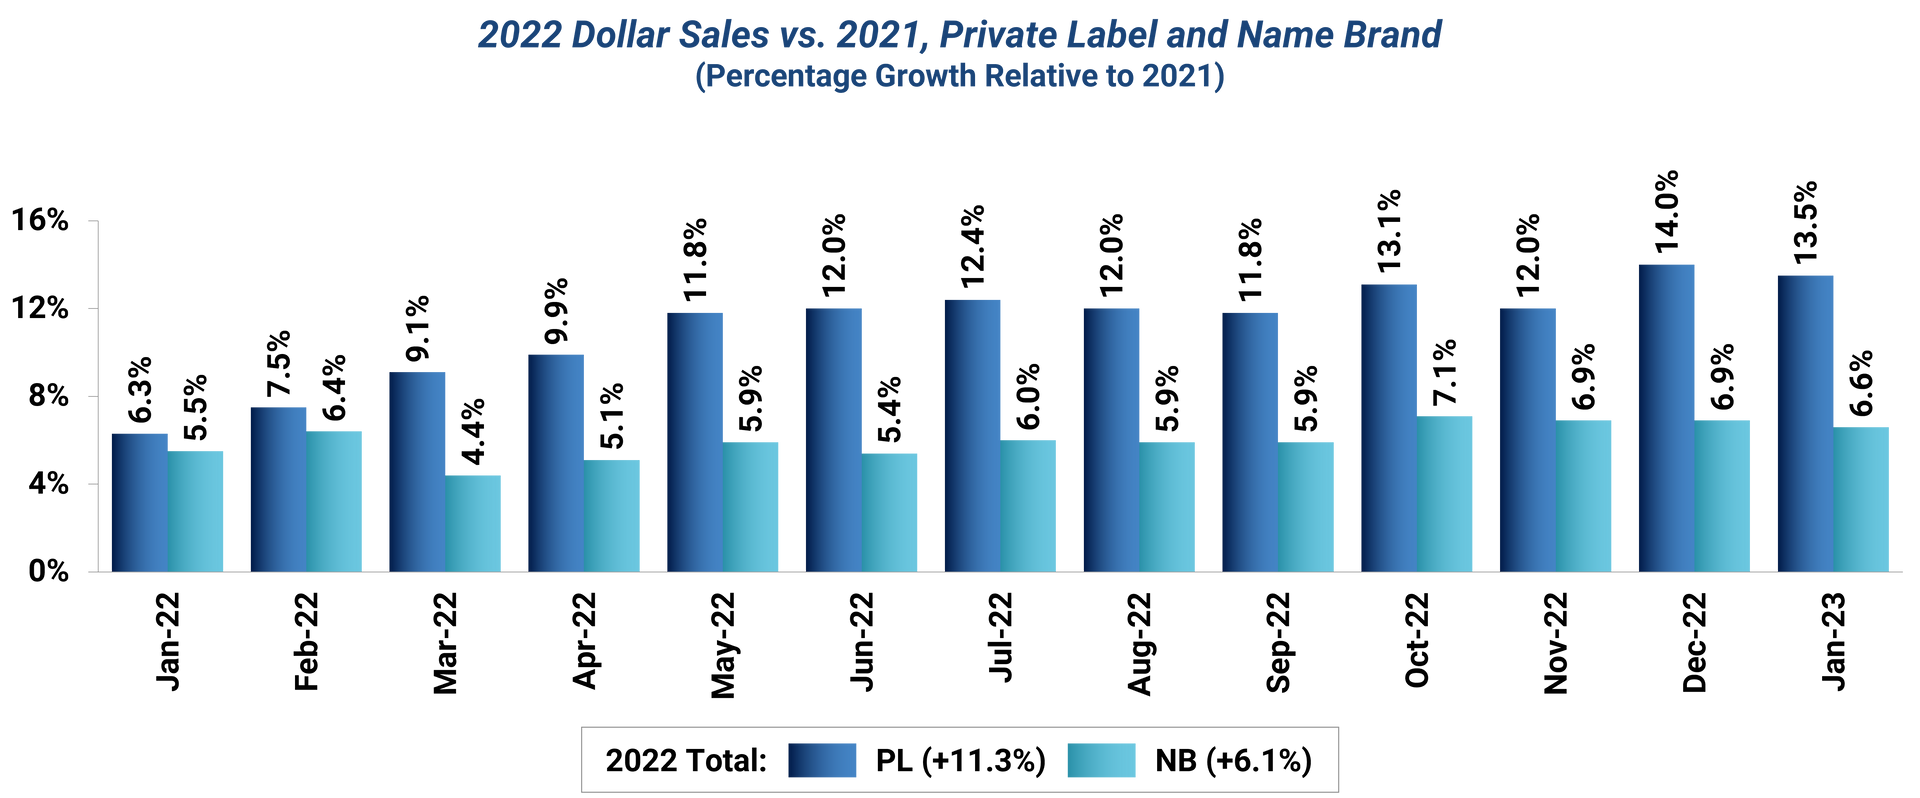 Bar chart depicting 2022 dollar sales vs 2021 for private label and name brand. The 2022 sale totals for private labels had an 11.3% increase while name brands had a 6.1% increase.